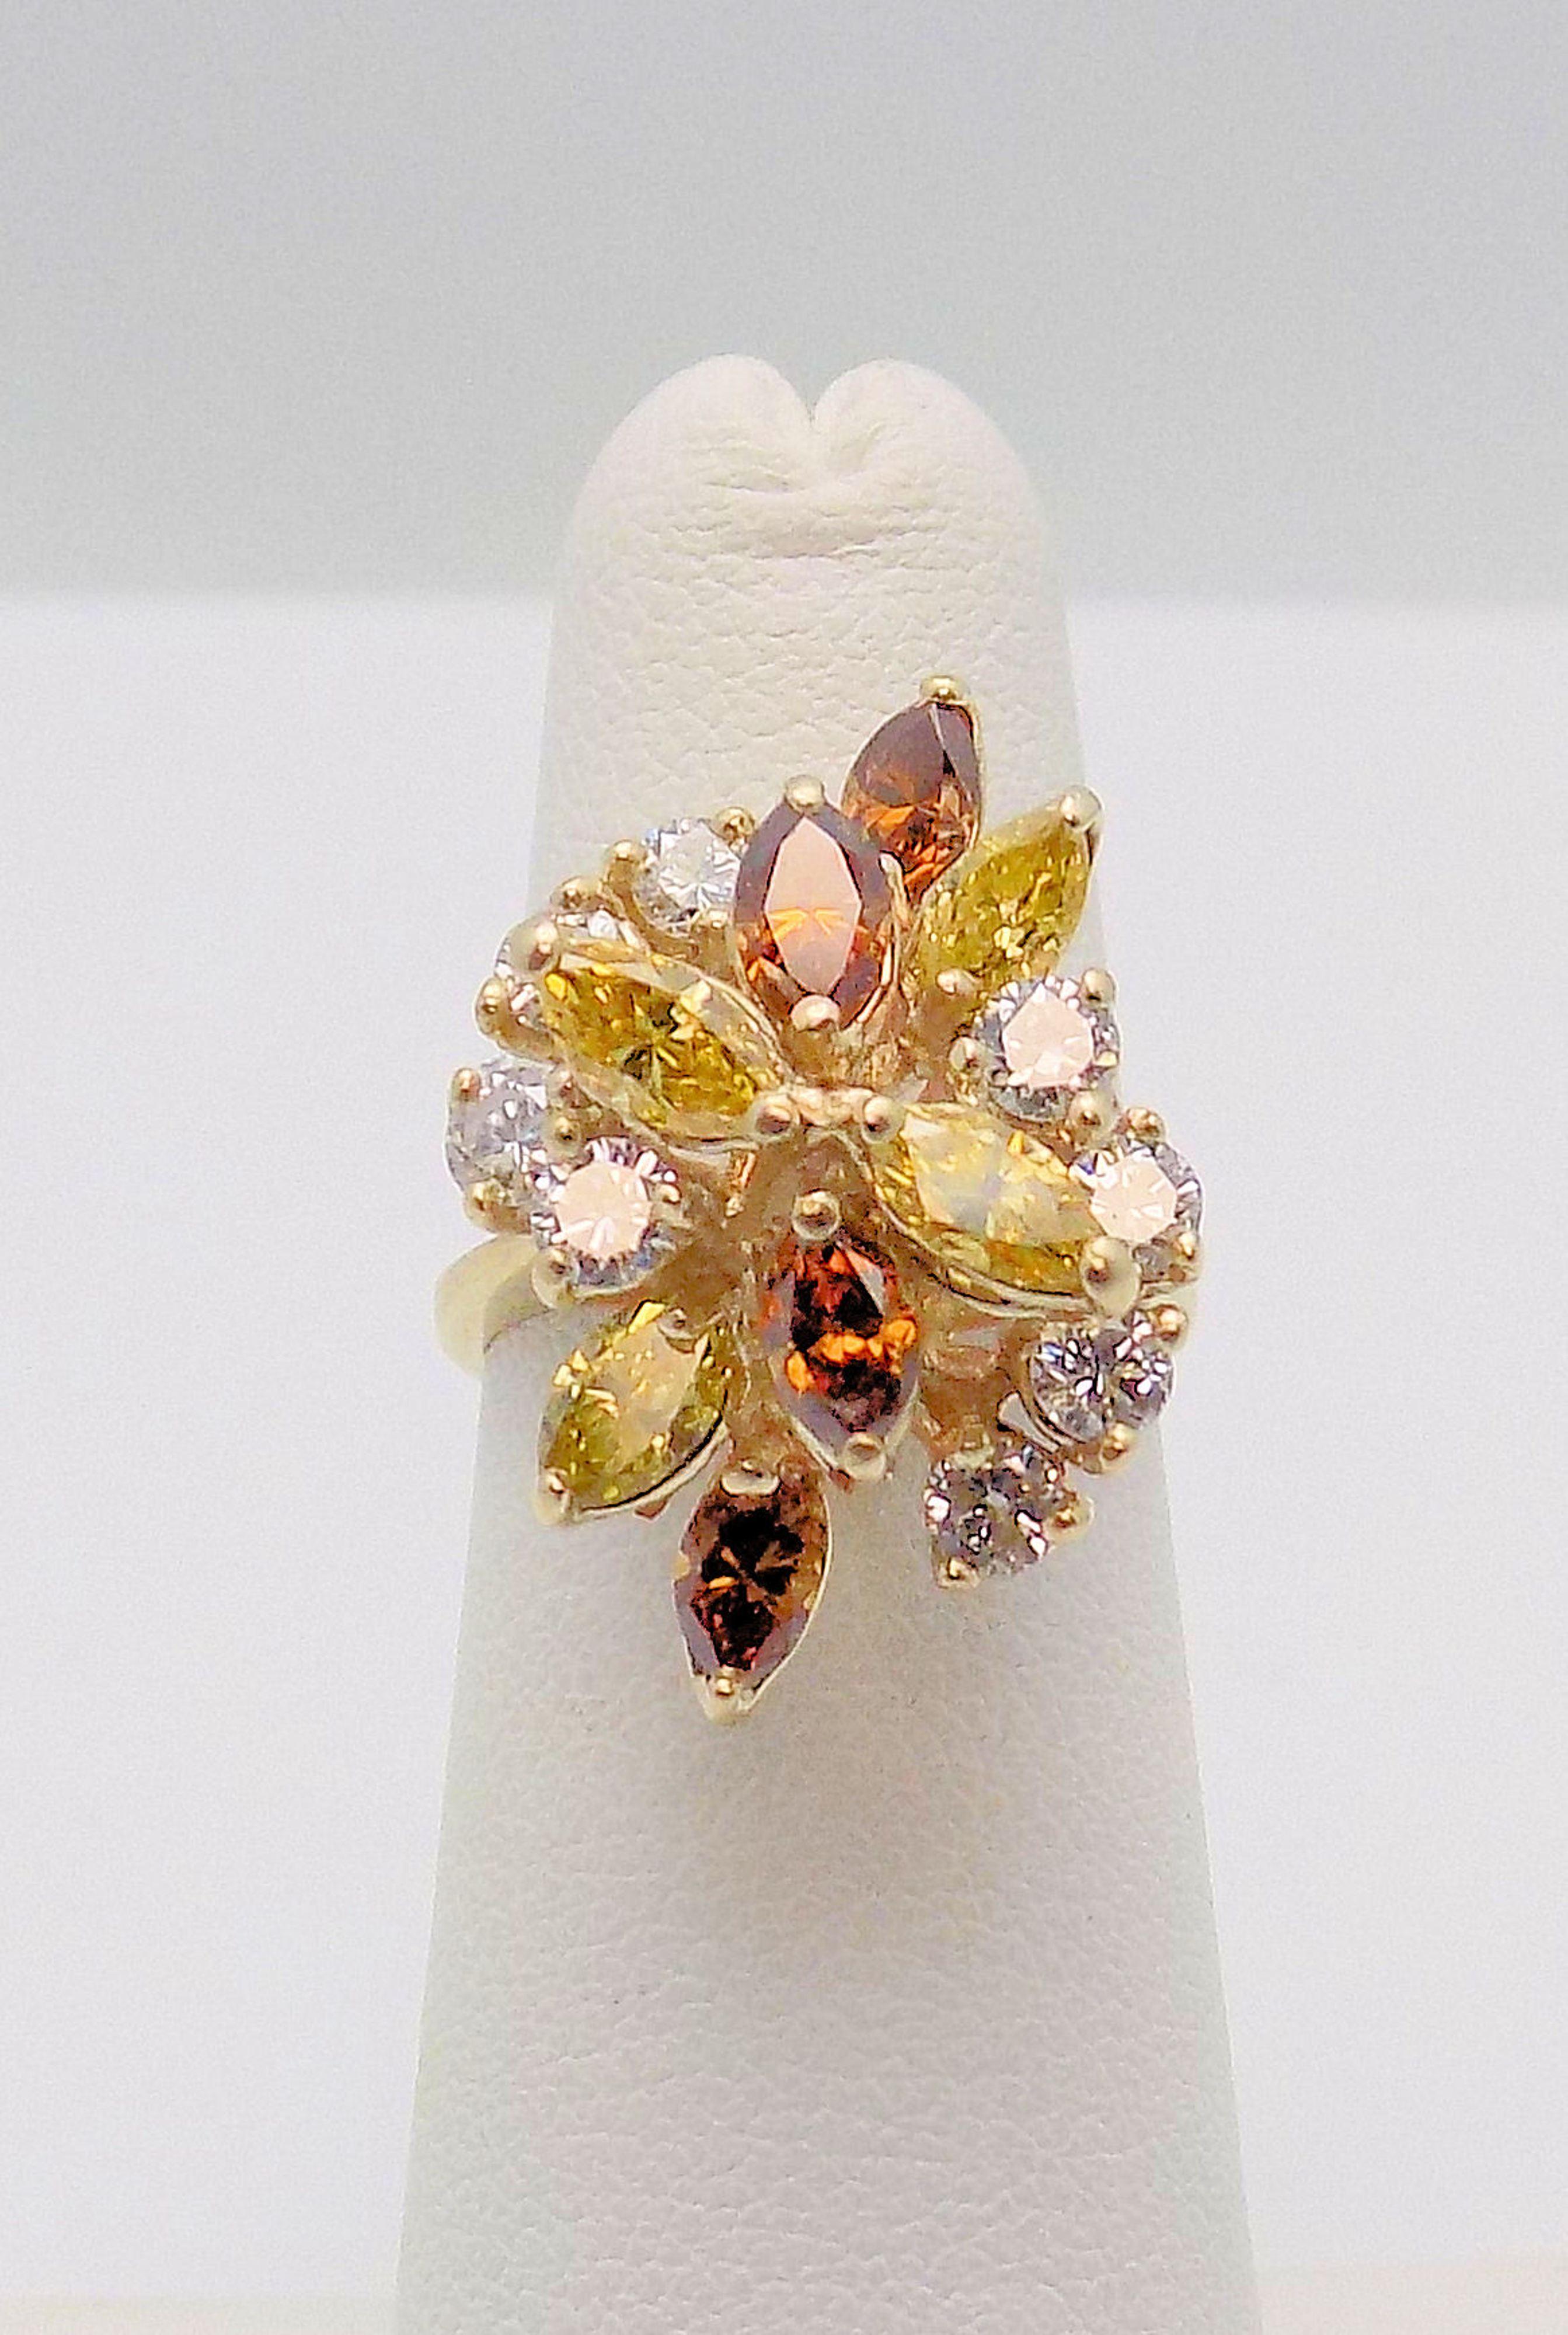 14 Karat Yellow Gold Canary and Cognac Diamond Cocktail Ring In Excellent Condition For Sale In Dallas, TX